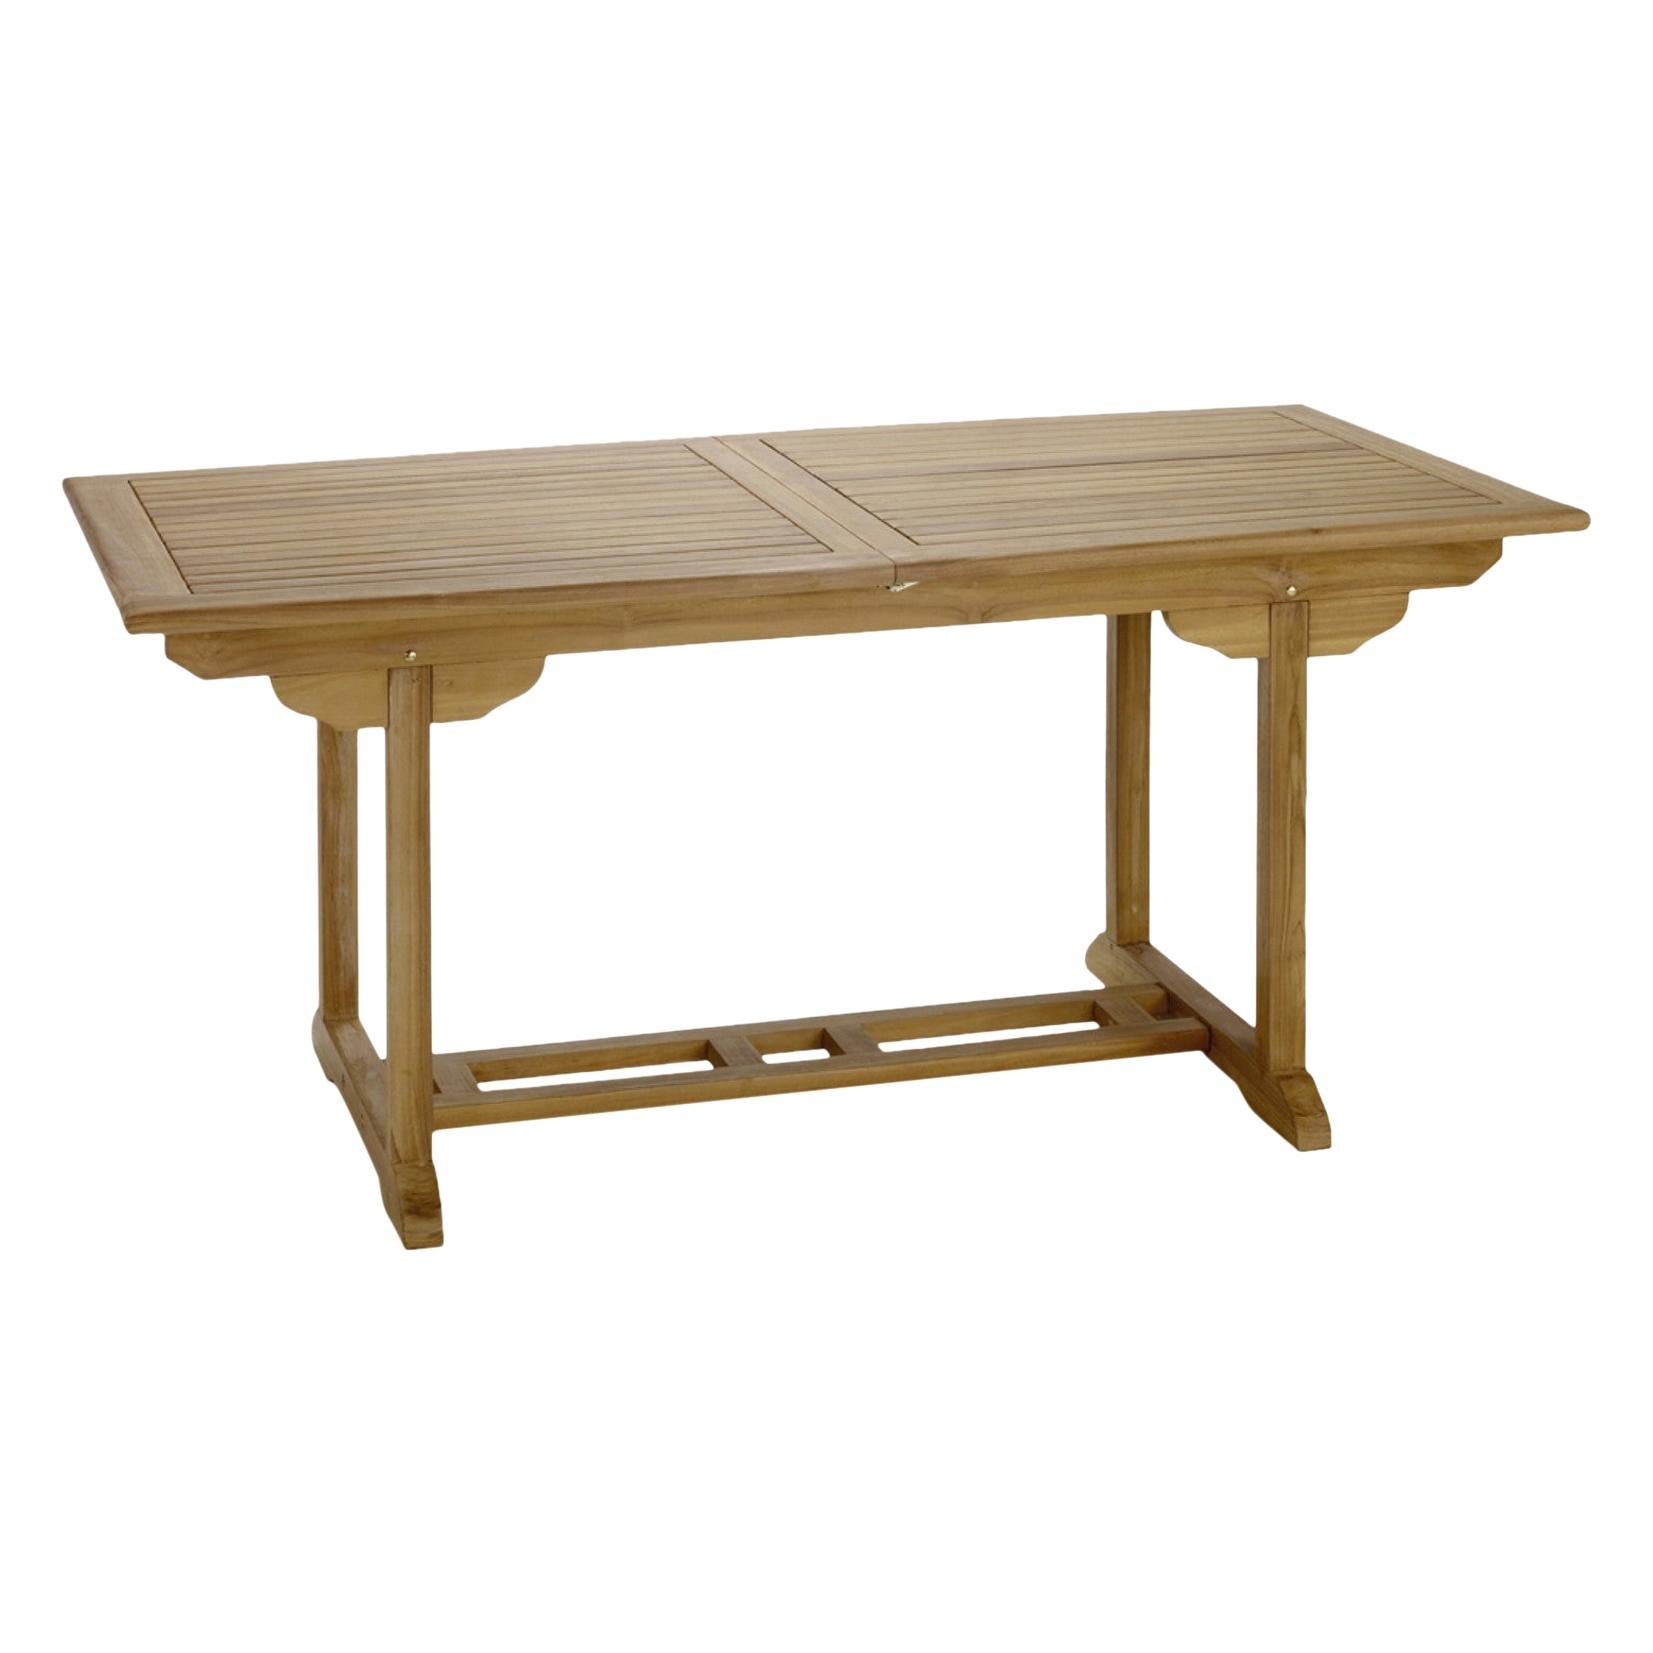 New Teak Rectangular Foldable Dining Table, Indoor and Outdoor For Sale